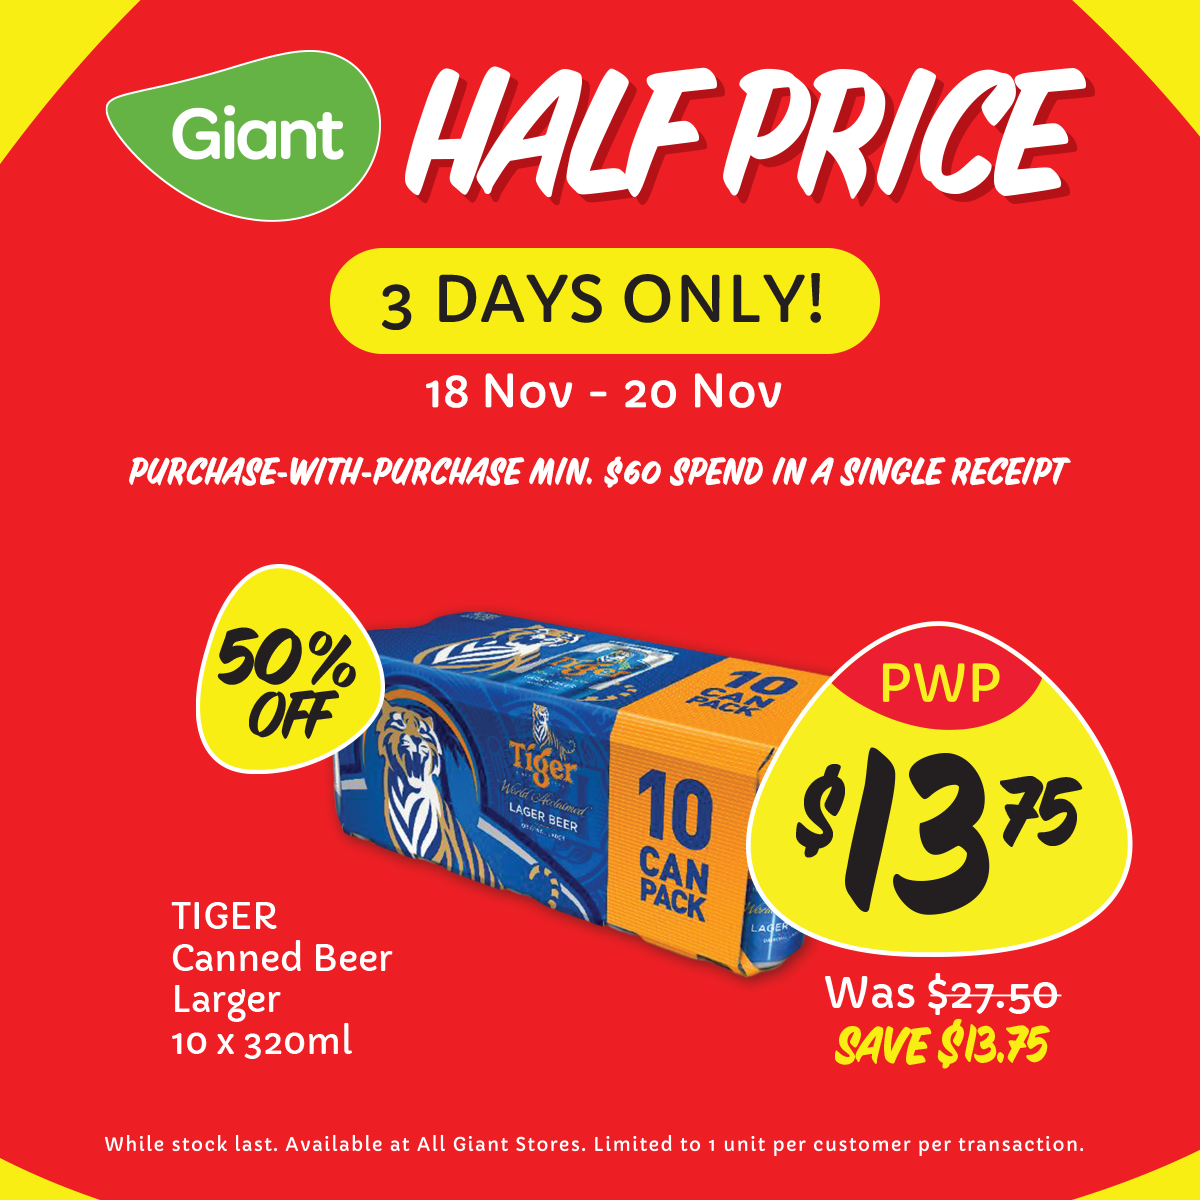 Lobang: Giant is offering 50% off Tiger Canned Beer with minimum purchase, costs only $1.38 per can from 18 - 20 Nov 22 - 3